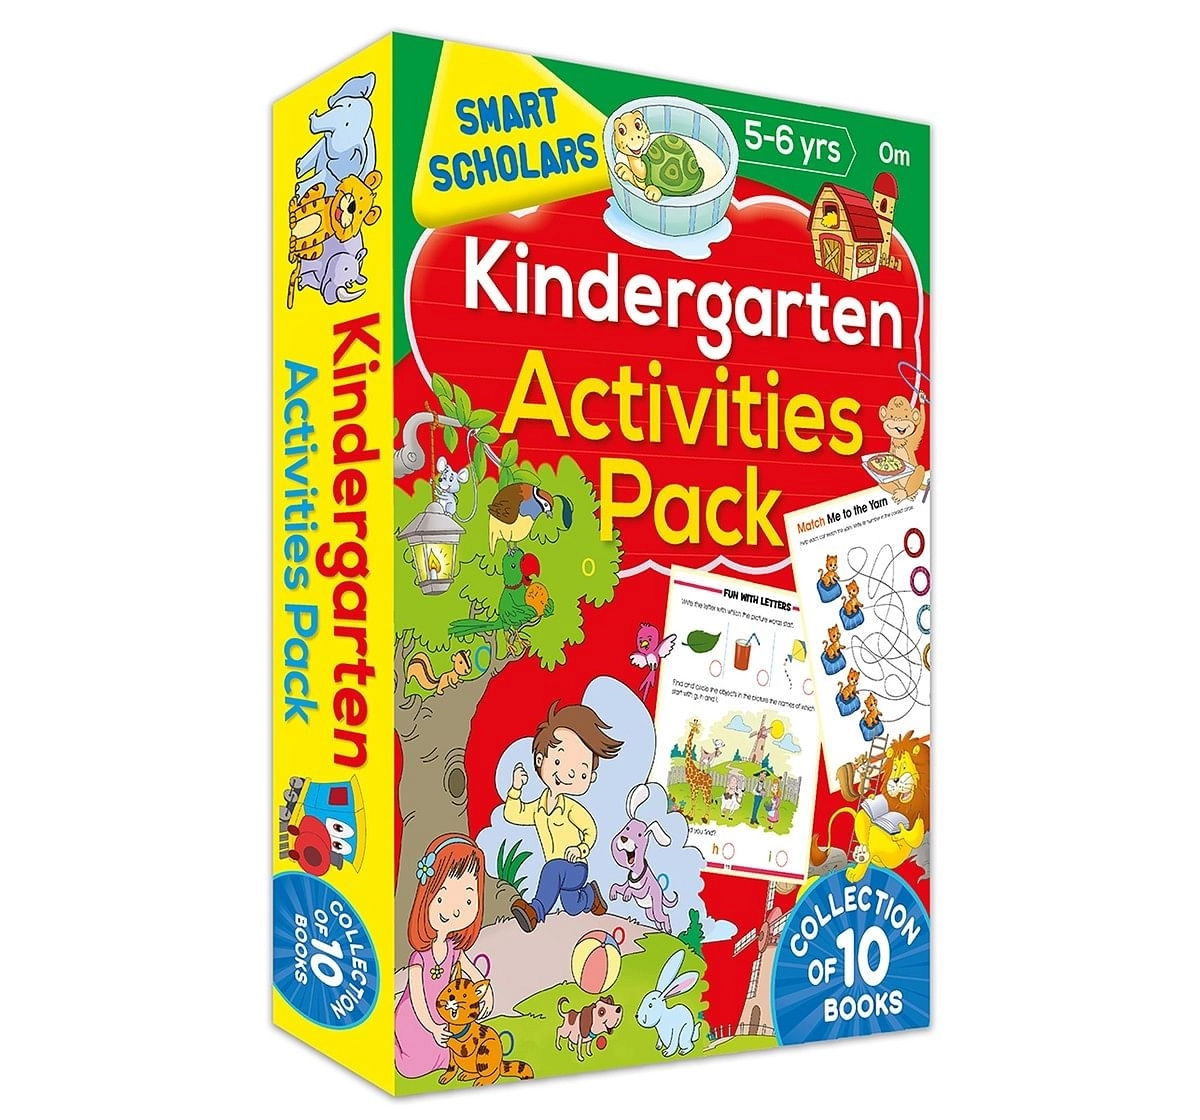 By　Pack　Book　320　Team,　Smart　Scholars,　Of　Kindergarten　Collection　Om　Books　Activities　Paperback　Pages　Editorial